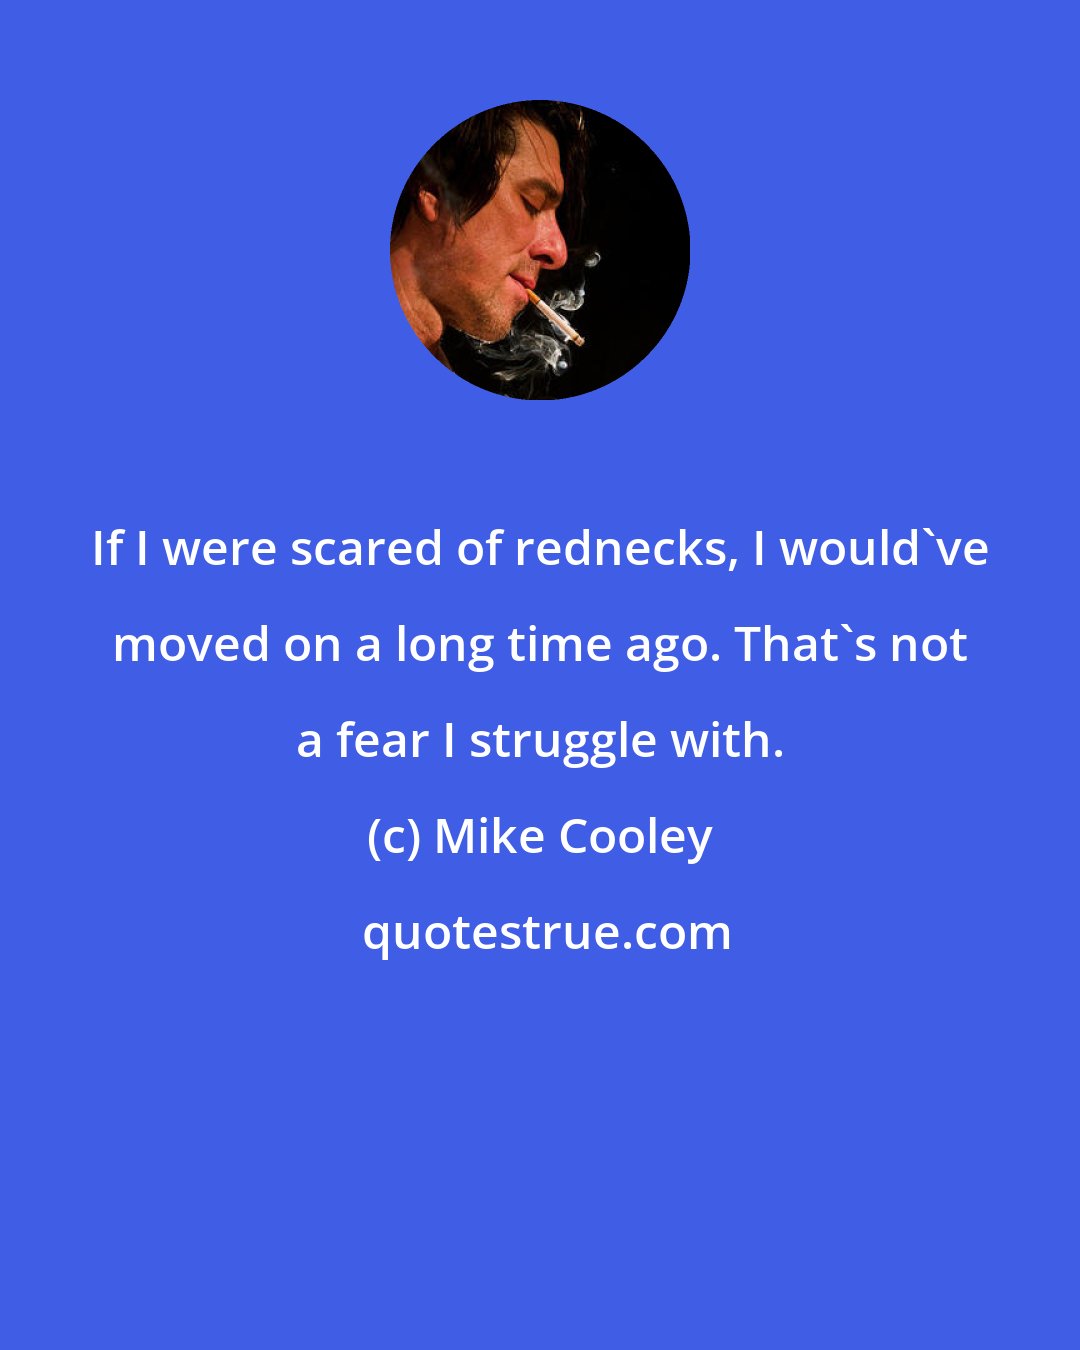 Mike Cooley: If I were scared of rednecks, I would've moved on a long time ago. That's not a fear I struggle with.